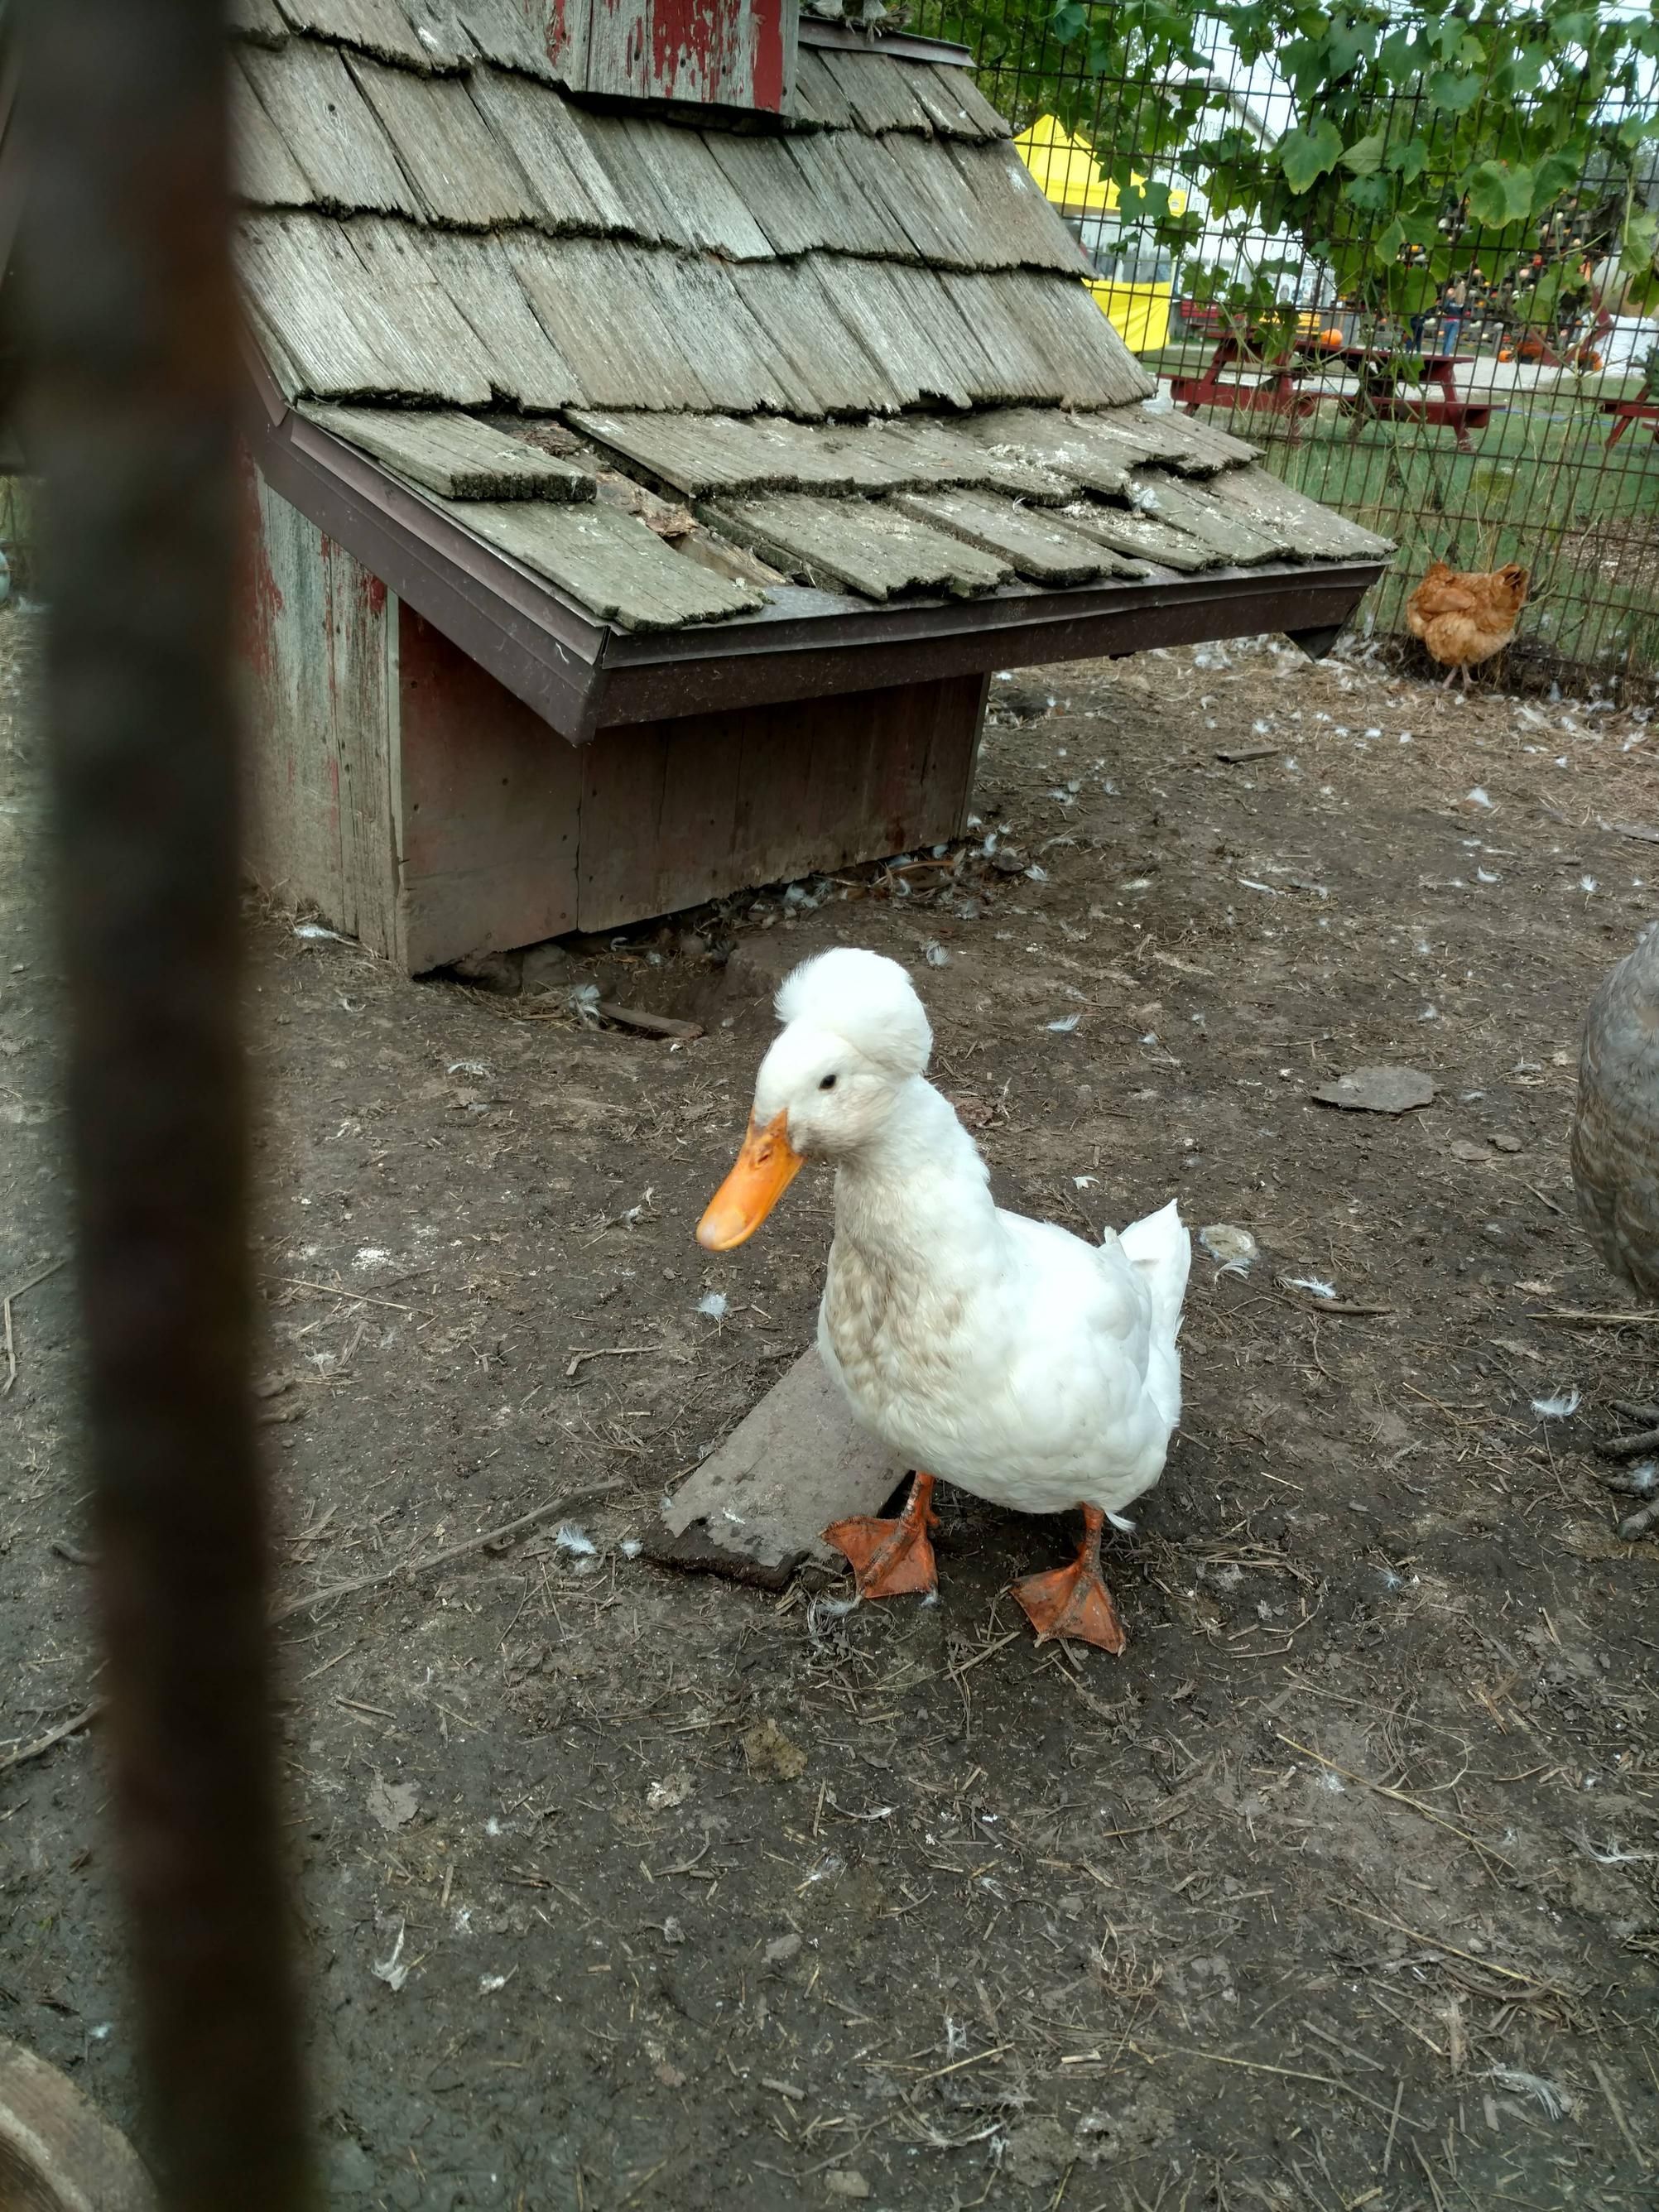 This duck has an afro